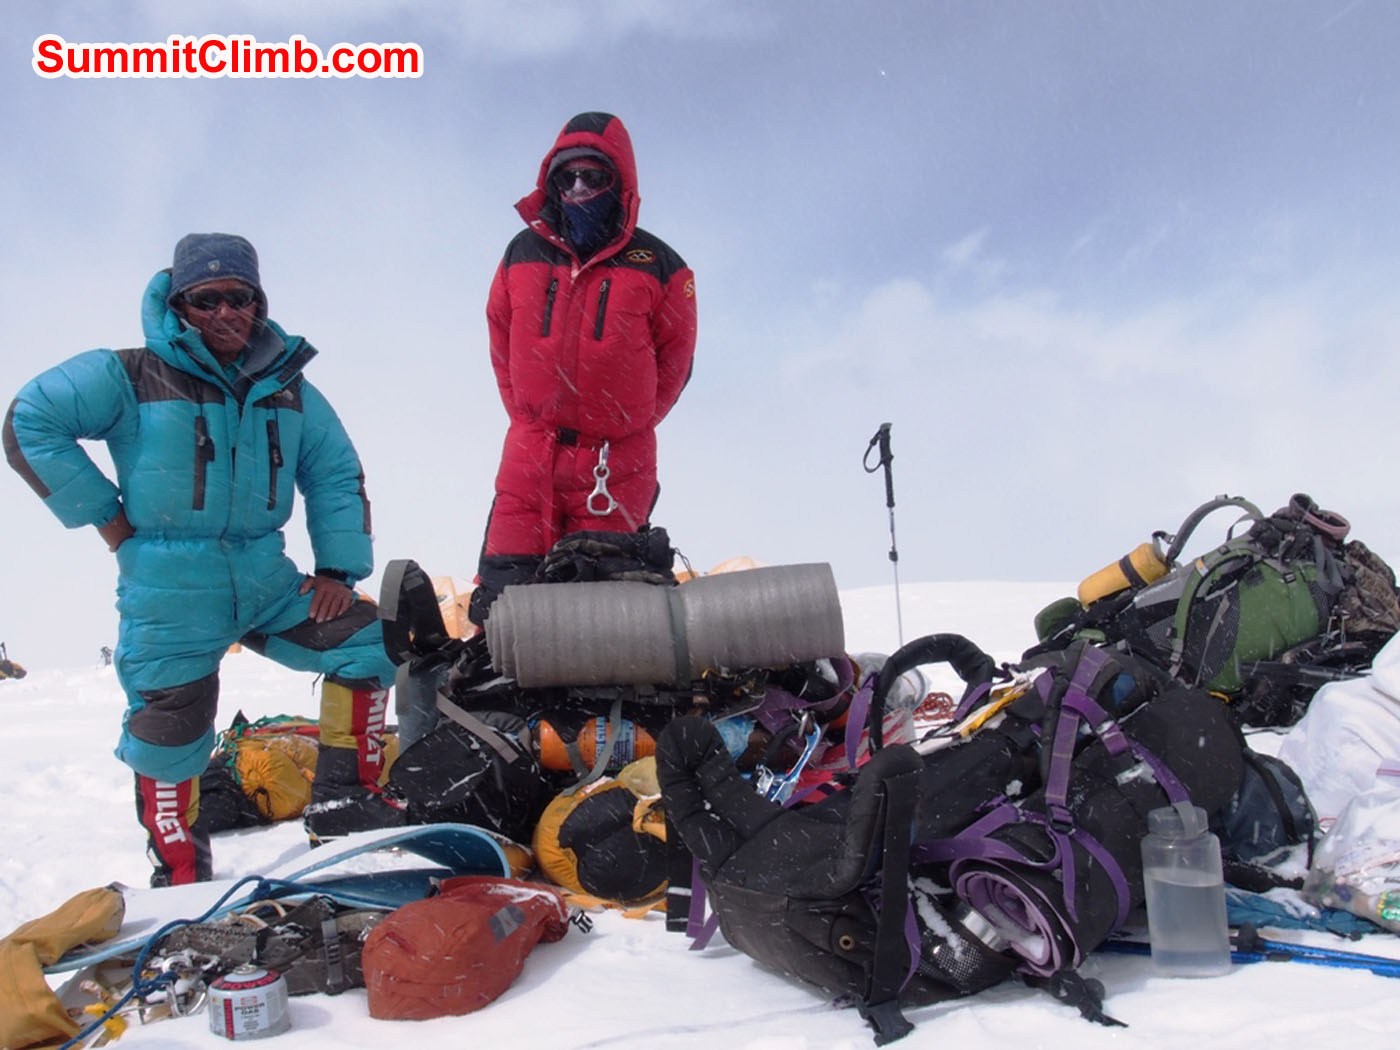 Jangbu and Dan. Packing loads to carry back down the mountain after summiting. Alan Barclay Photo